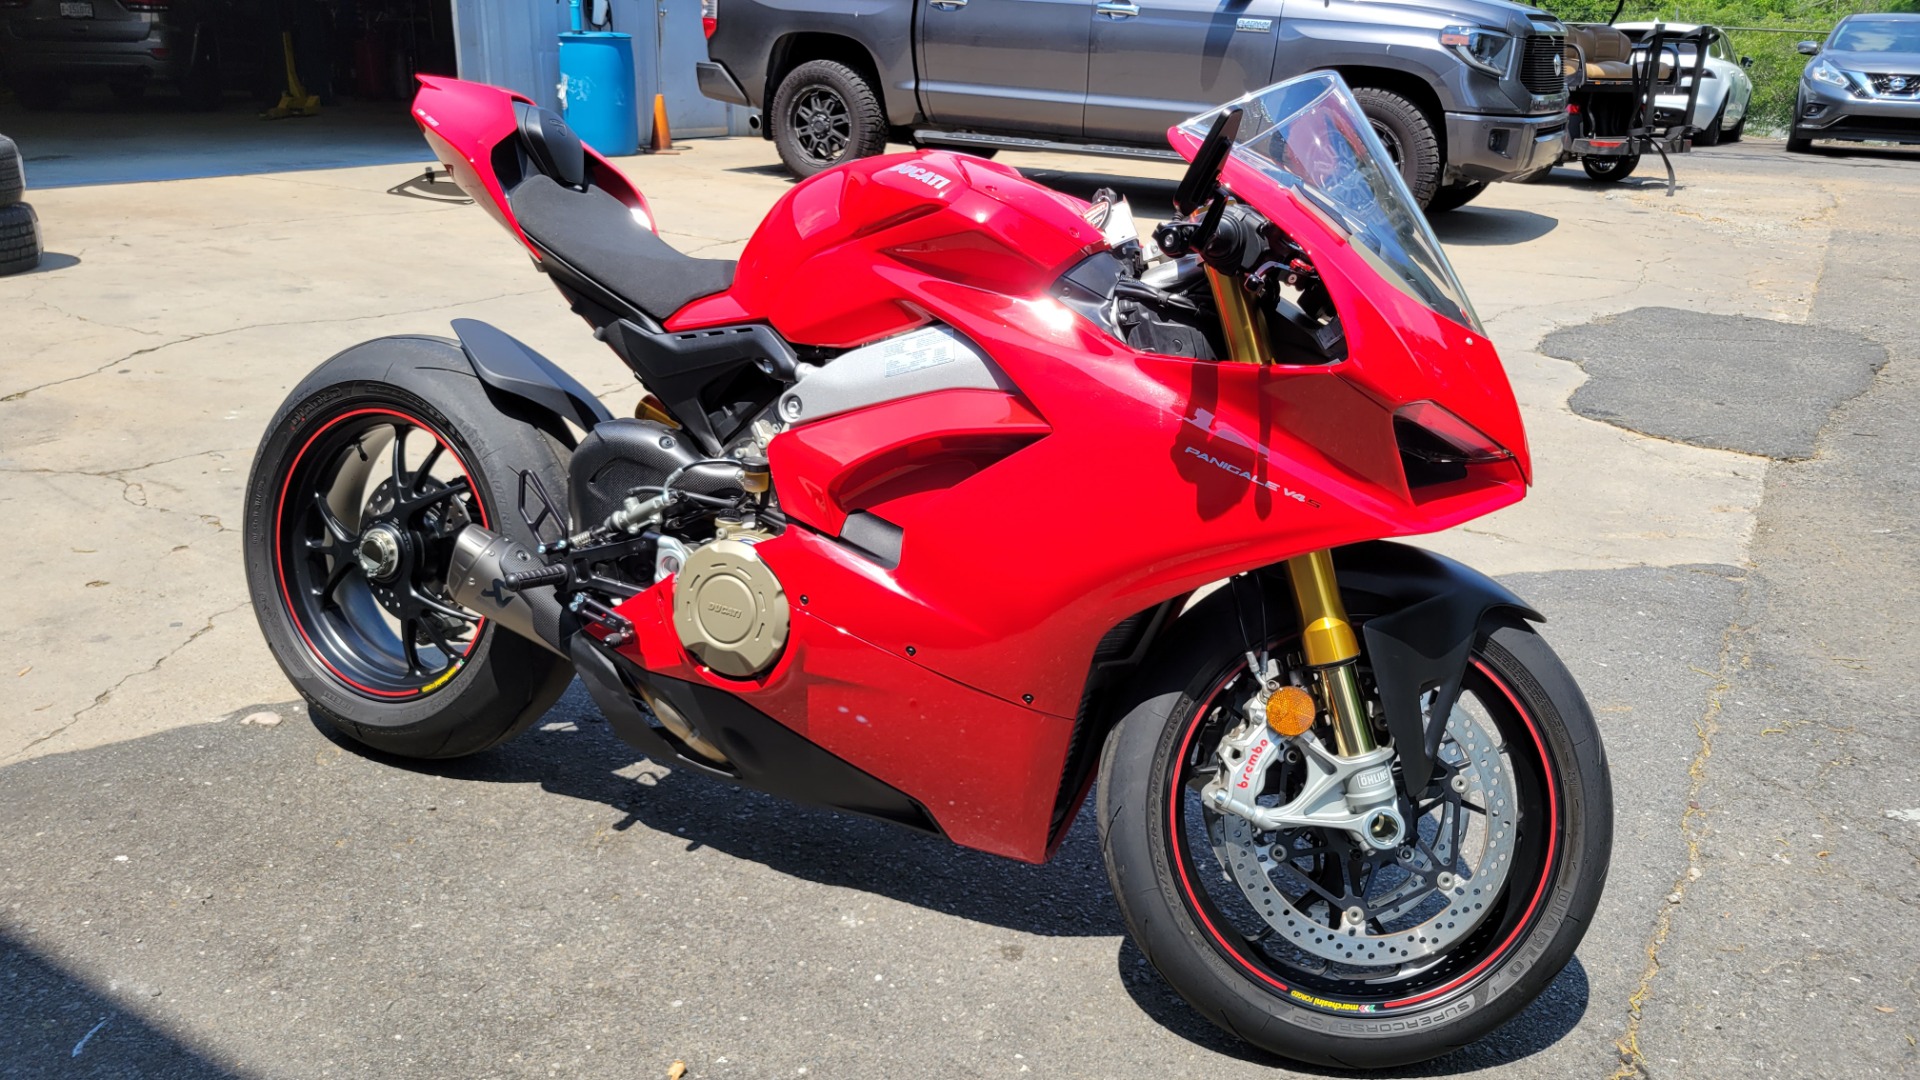 Used 2018 Ducati PANIGALE V4S / 1103CC 214HP / FUEL INJECTED / LOW MILES for sale $24,500 at Formula Imports in Charlotte NC 28227 3